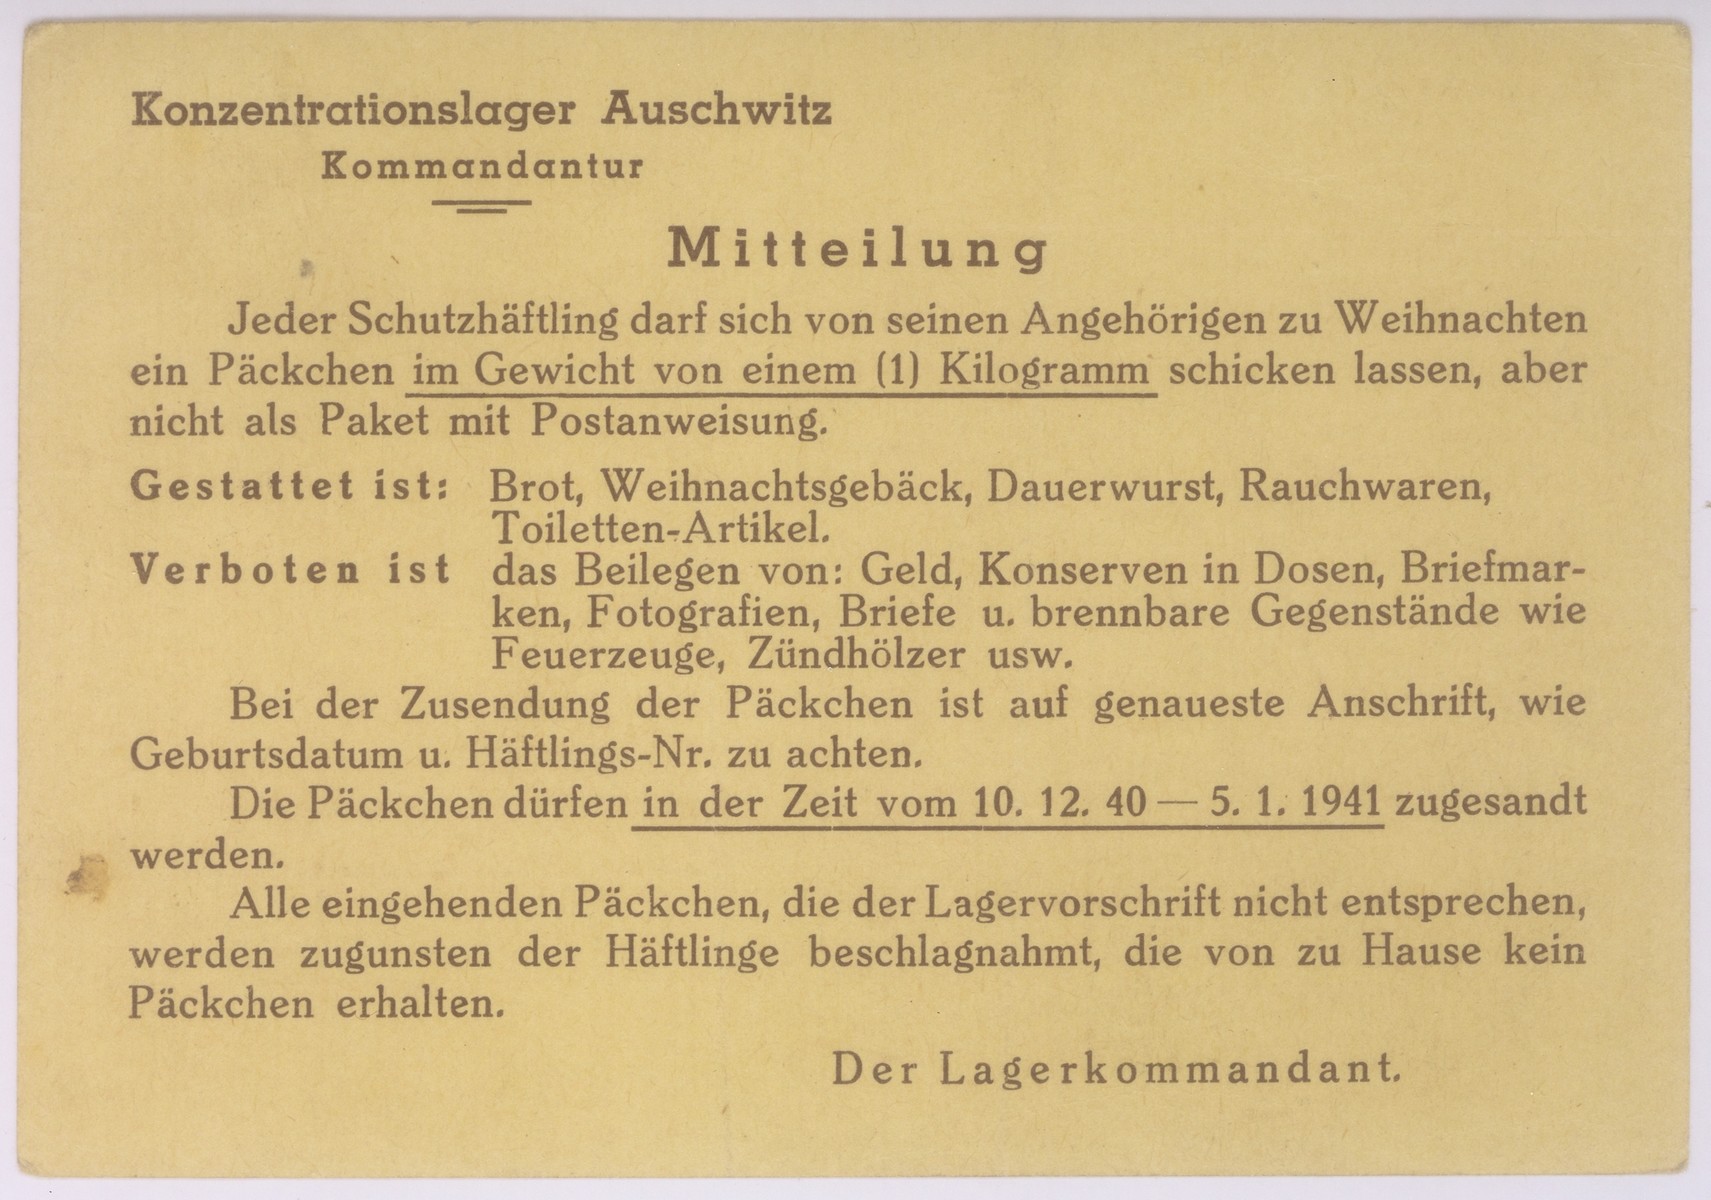 Message side of a postcard sent by Polish prisoner in Auschwitz, Kasimir Rozycki, to his wife, Stephania, in Warsaw.

The printed messages from the camp commandant informs the recipient that each prisoner may receive a 1kg Christmas package containing bread, Christmas baked goods, hard sausage, tobacco products, and toilet articles.  The package may not contain currency or coin, preserves in cans, stamps, photographs, letters or cigarette lighters and matches.  If a package is not correctly addressed, the contents will confiscated and "used for the benefit of those prisoners who receive no packages from home."